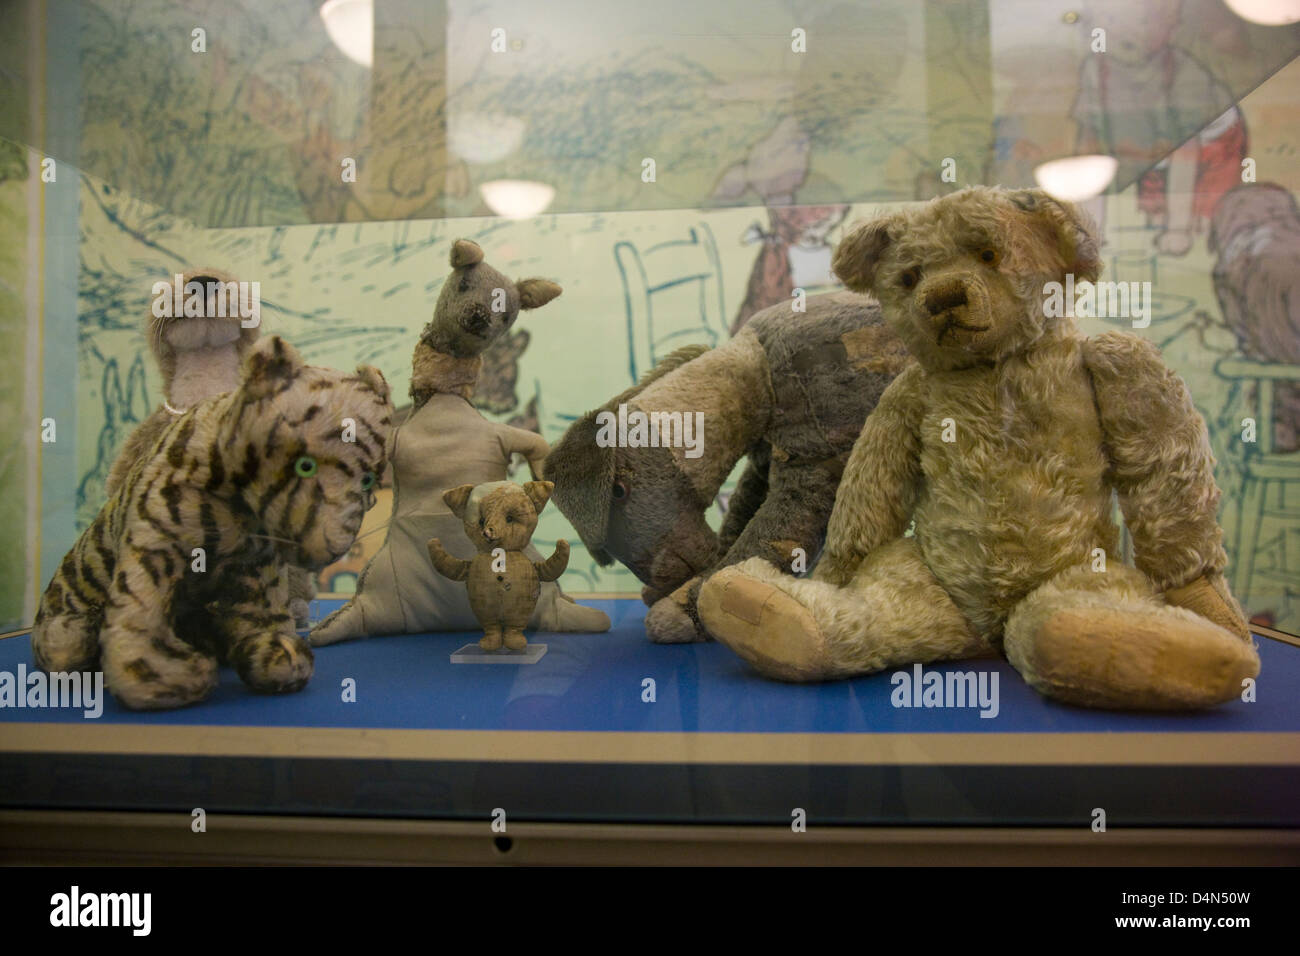 The original Winne the Pooh stuffed toy animals in a glass display case in New York Public Library Stock Photo